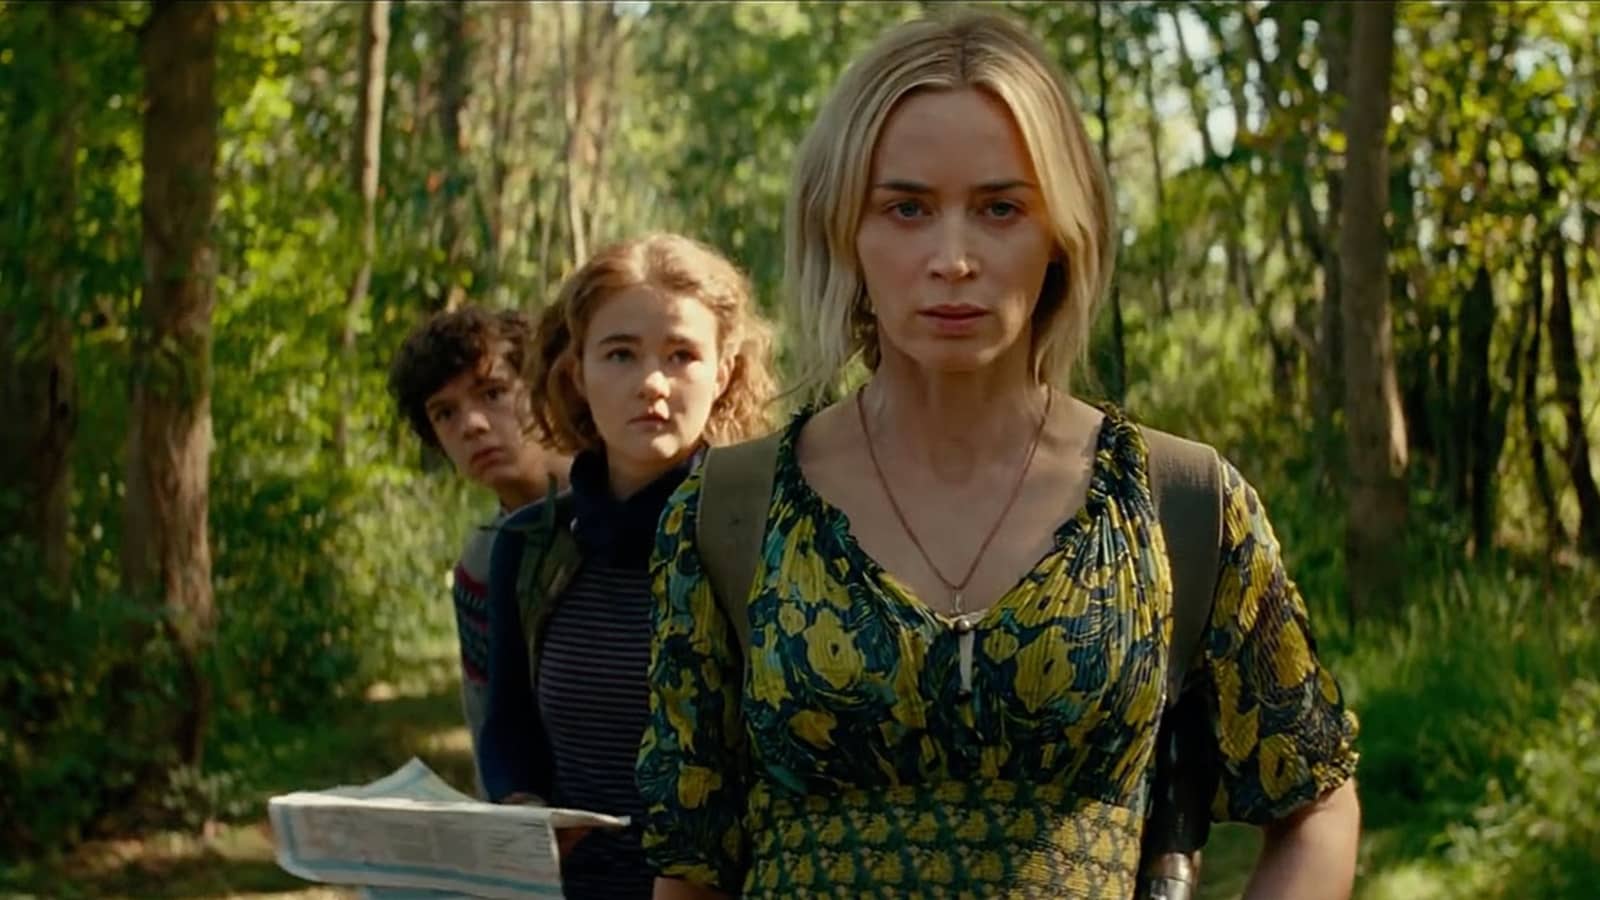 A video game based on "A Quiet Place" is in development